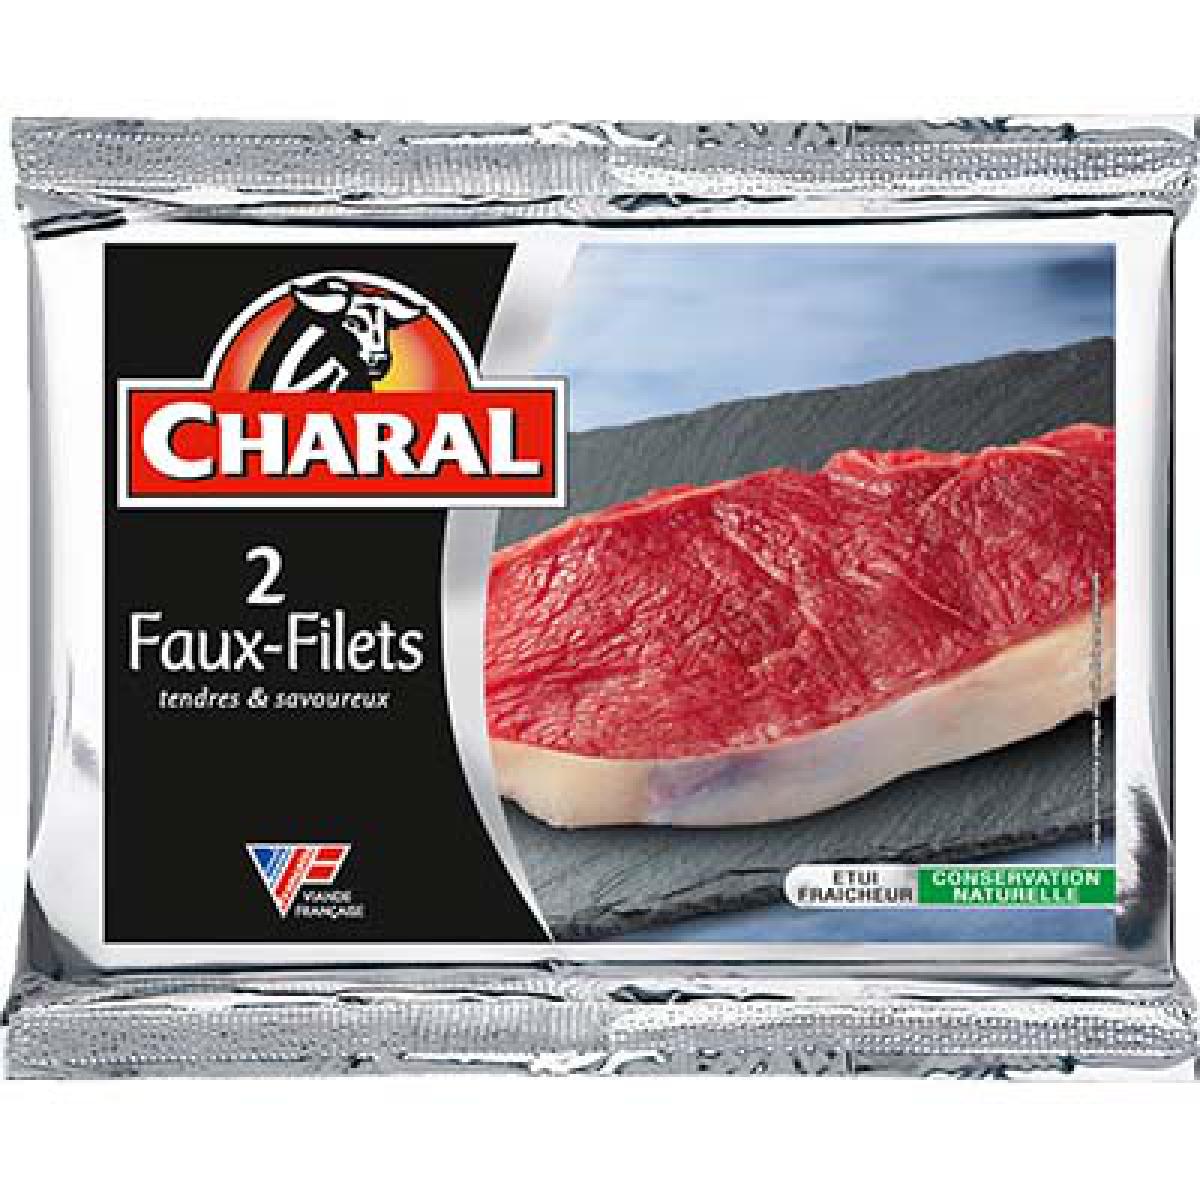 FAUX-FILET X2 340G CHARAL